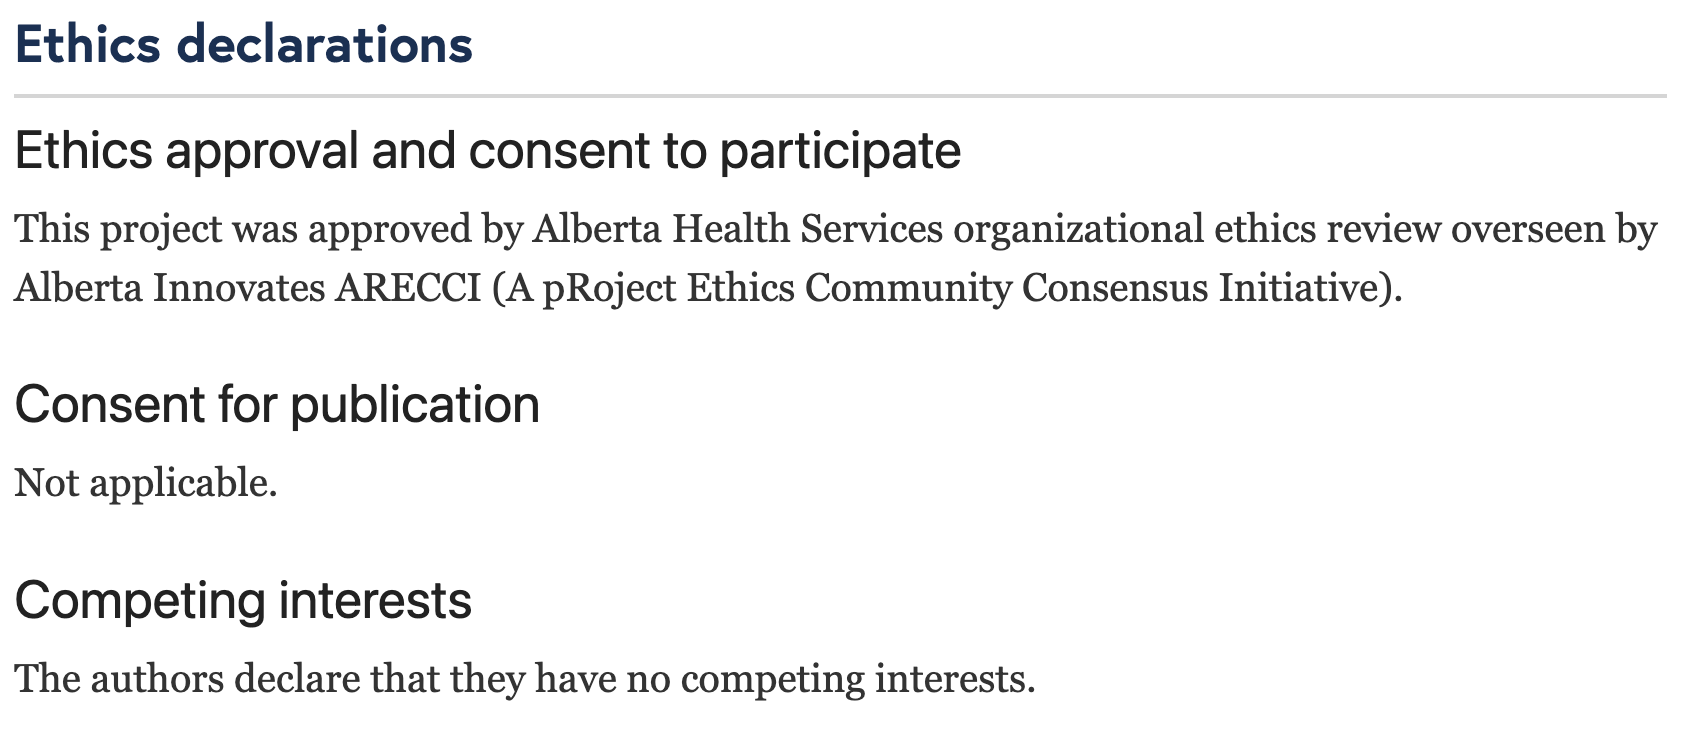 Ethics declarations Ethics approval and consent to participate This project was approved by Alberta Health Services organizational ethics review overseen by Alberta Innovates ARECCI (A pRoject Ethics Community Consensus Initiative).  Consent for publication Not applicable.  Competing interests The authors declare that they have no competing interests.